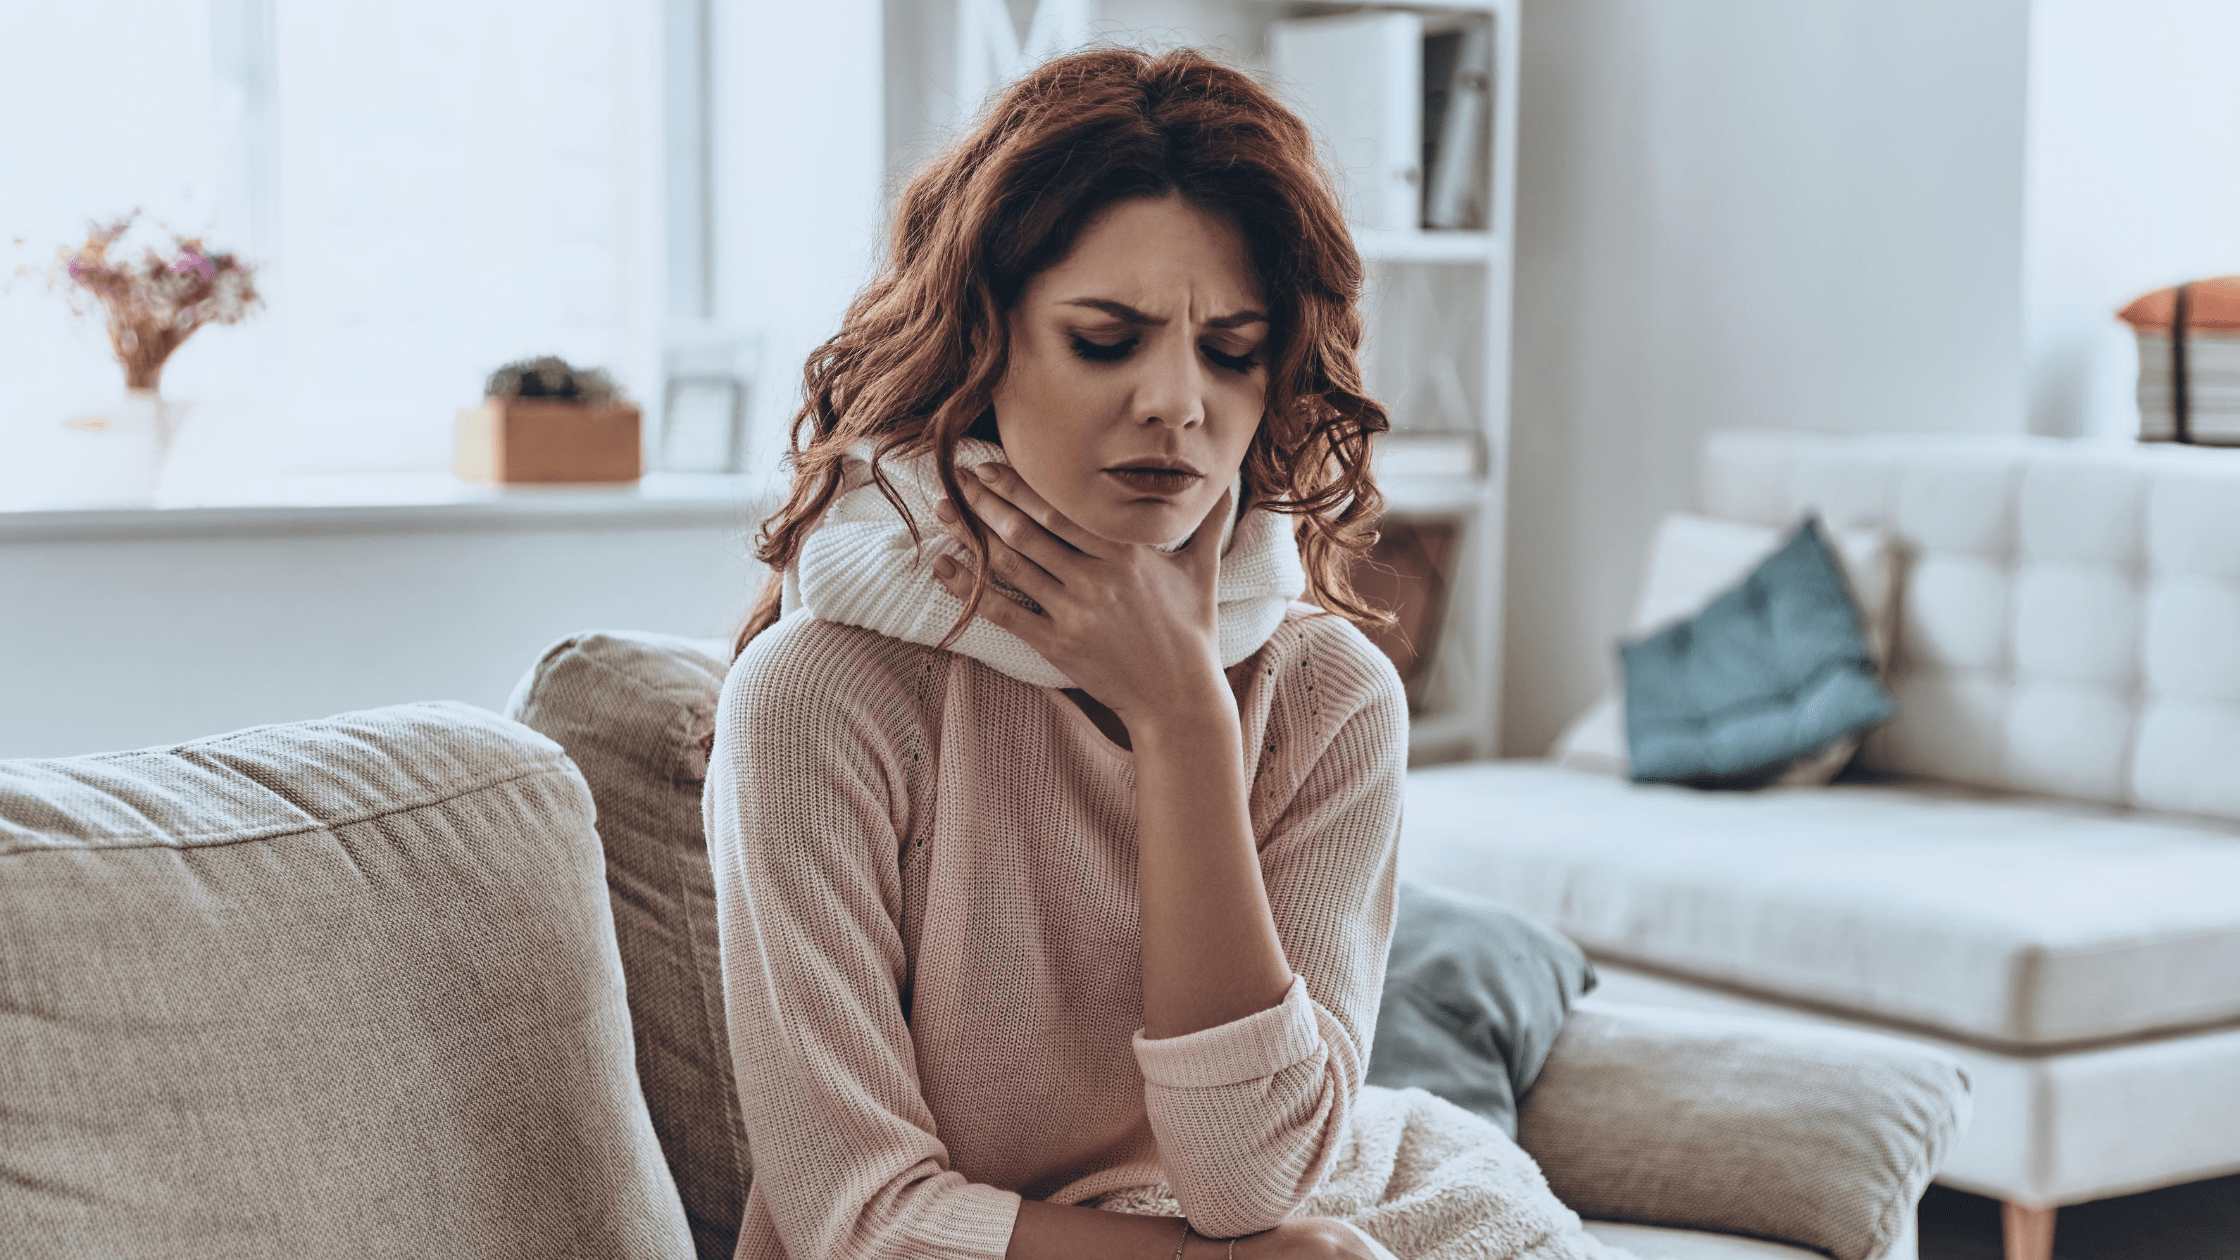 woman with red hair clutching her sore throat while sitting on couch